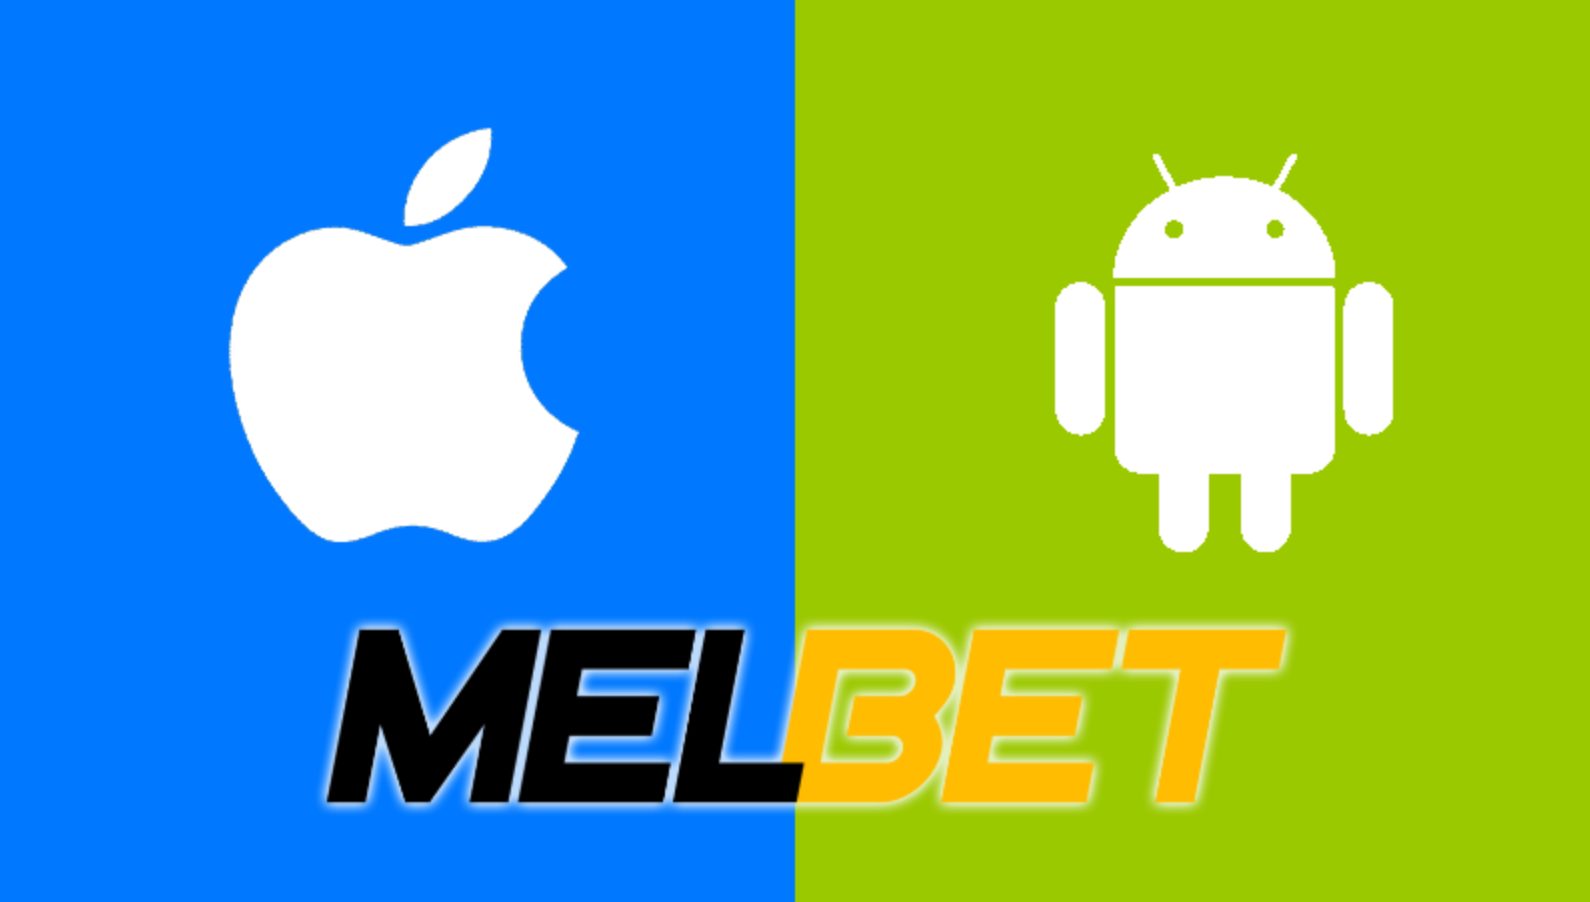 Getting the Melbet APK file for Android